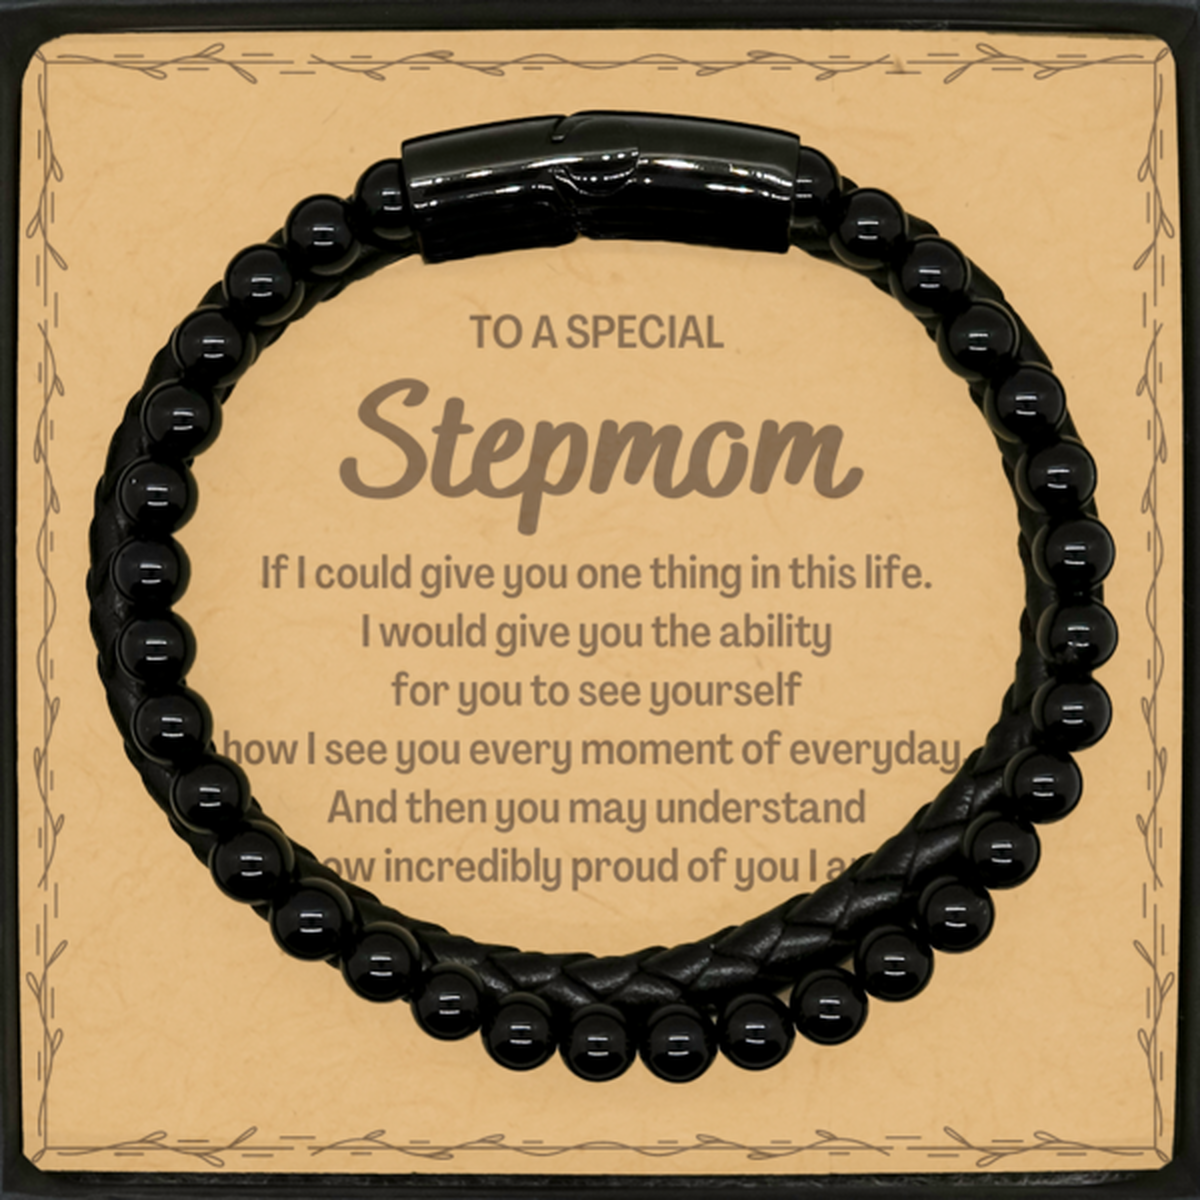 To My Stepmom Stone Leather Bracelets, Gifts For Stepmom Message Card, Inspirational Gifts for Christmas Birthday, Epic Gifts for Stepmom To A Special Stepmom how incredibly proud of you I am